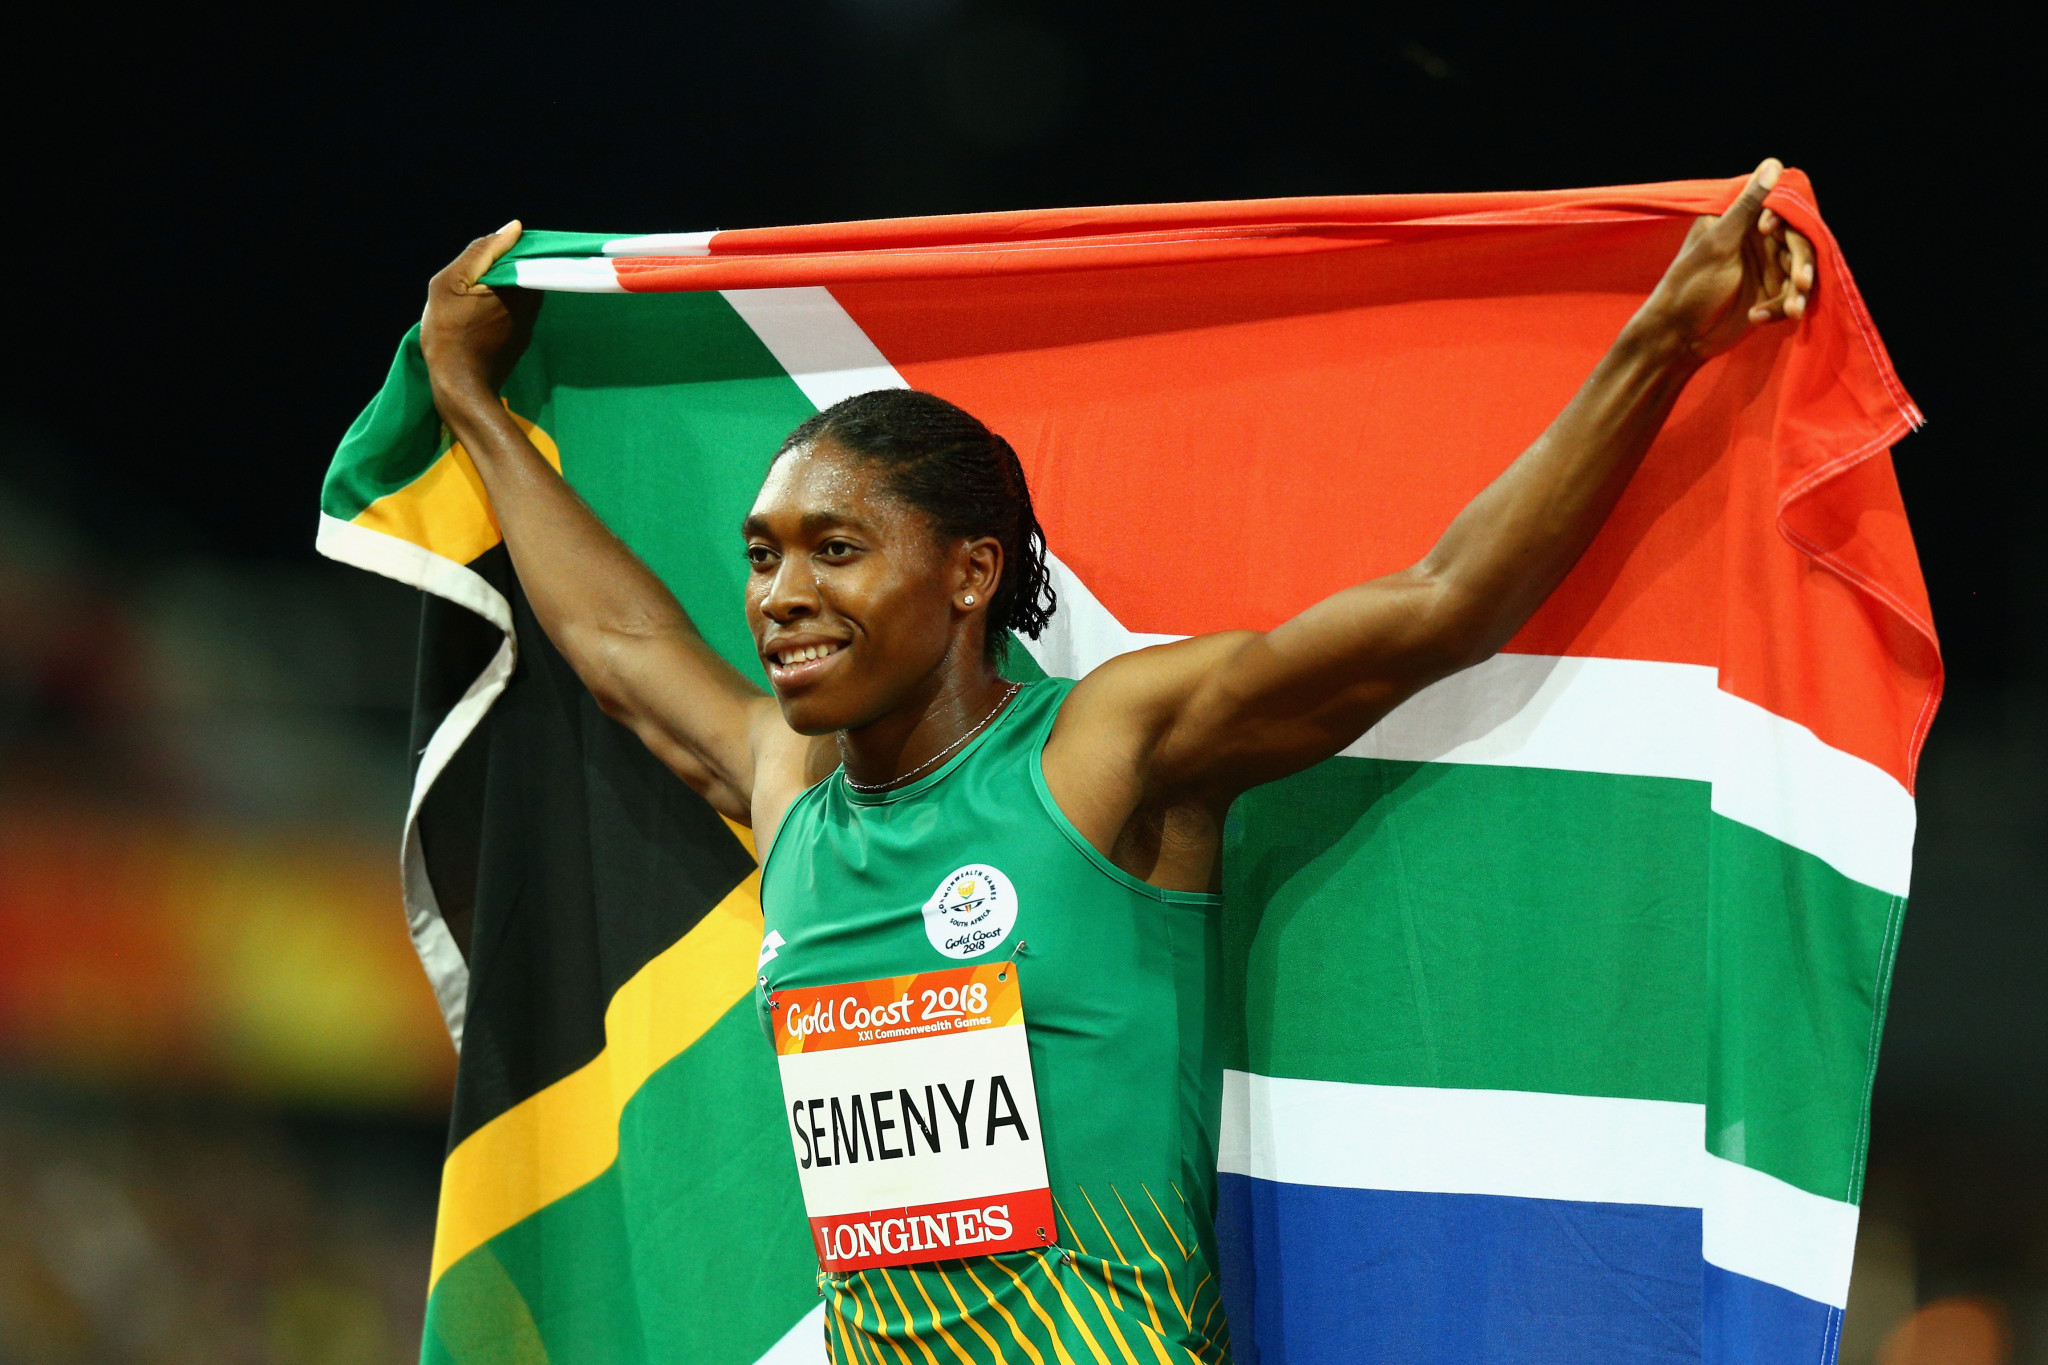 Caster Semenya was subject to gender testing in 2009 ©Getty Images